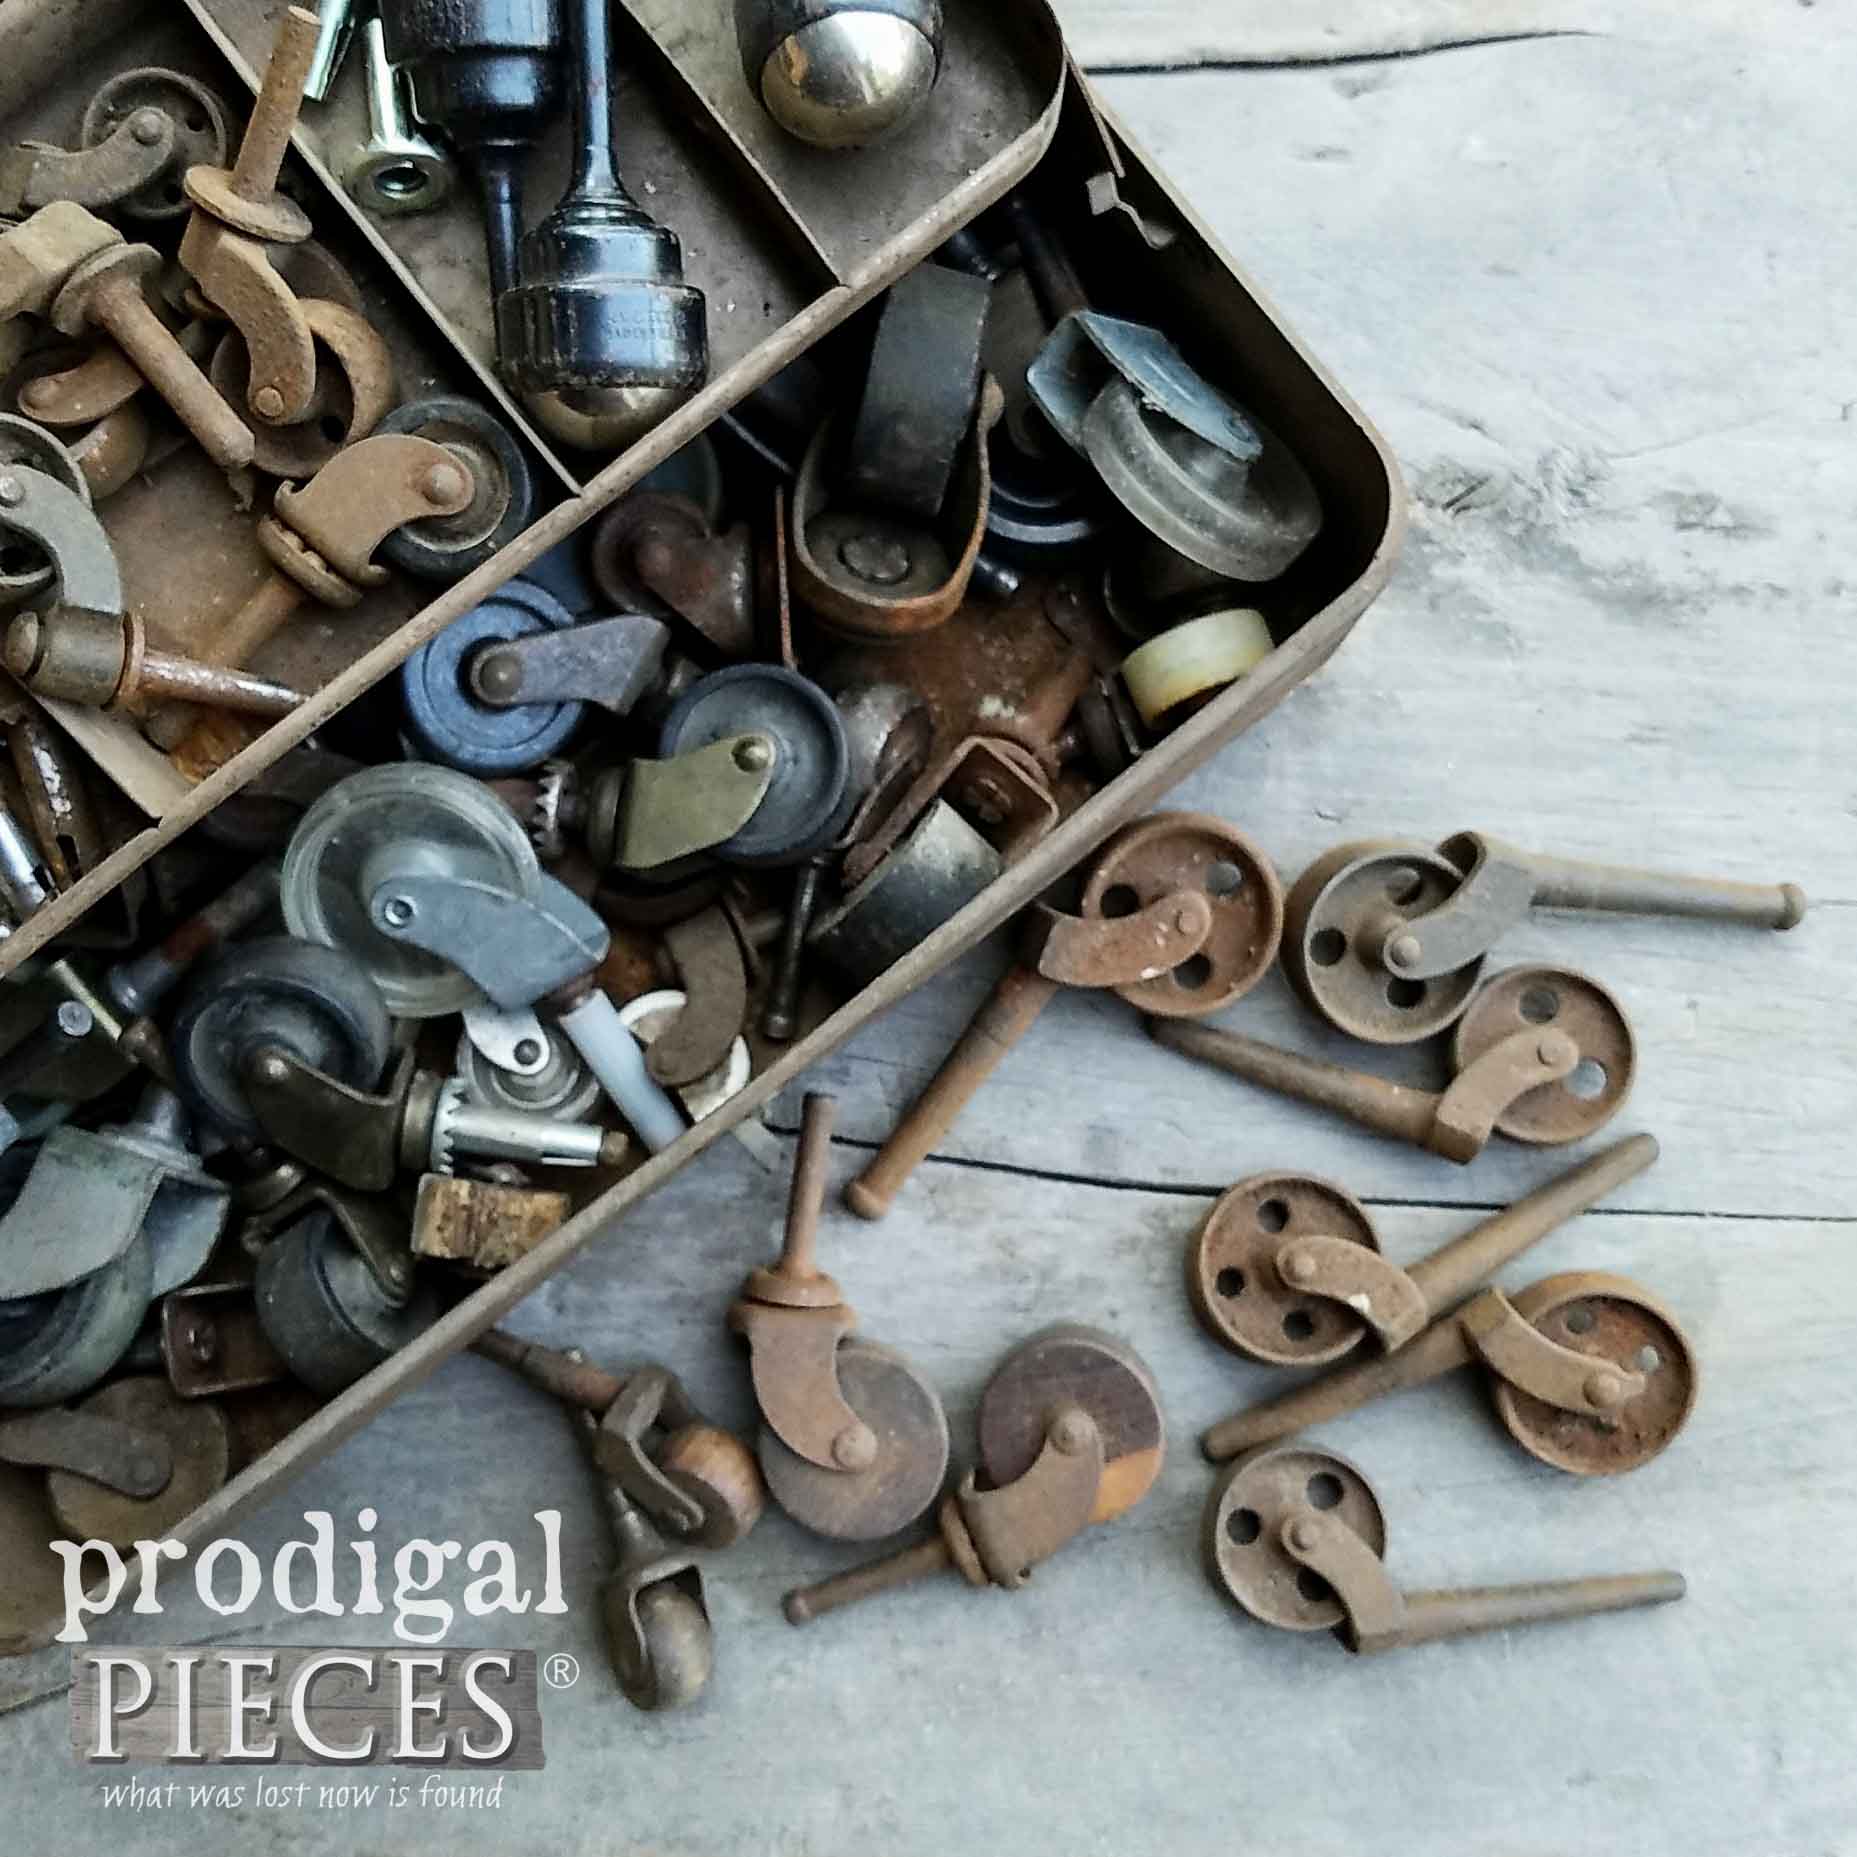 Collection of Antique Casters in Old Tool Box by Prodigal Pieces | prodigalpieces.com